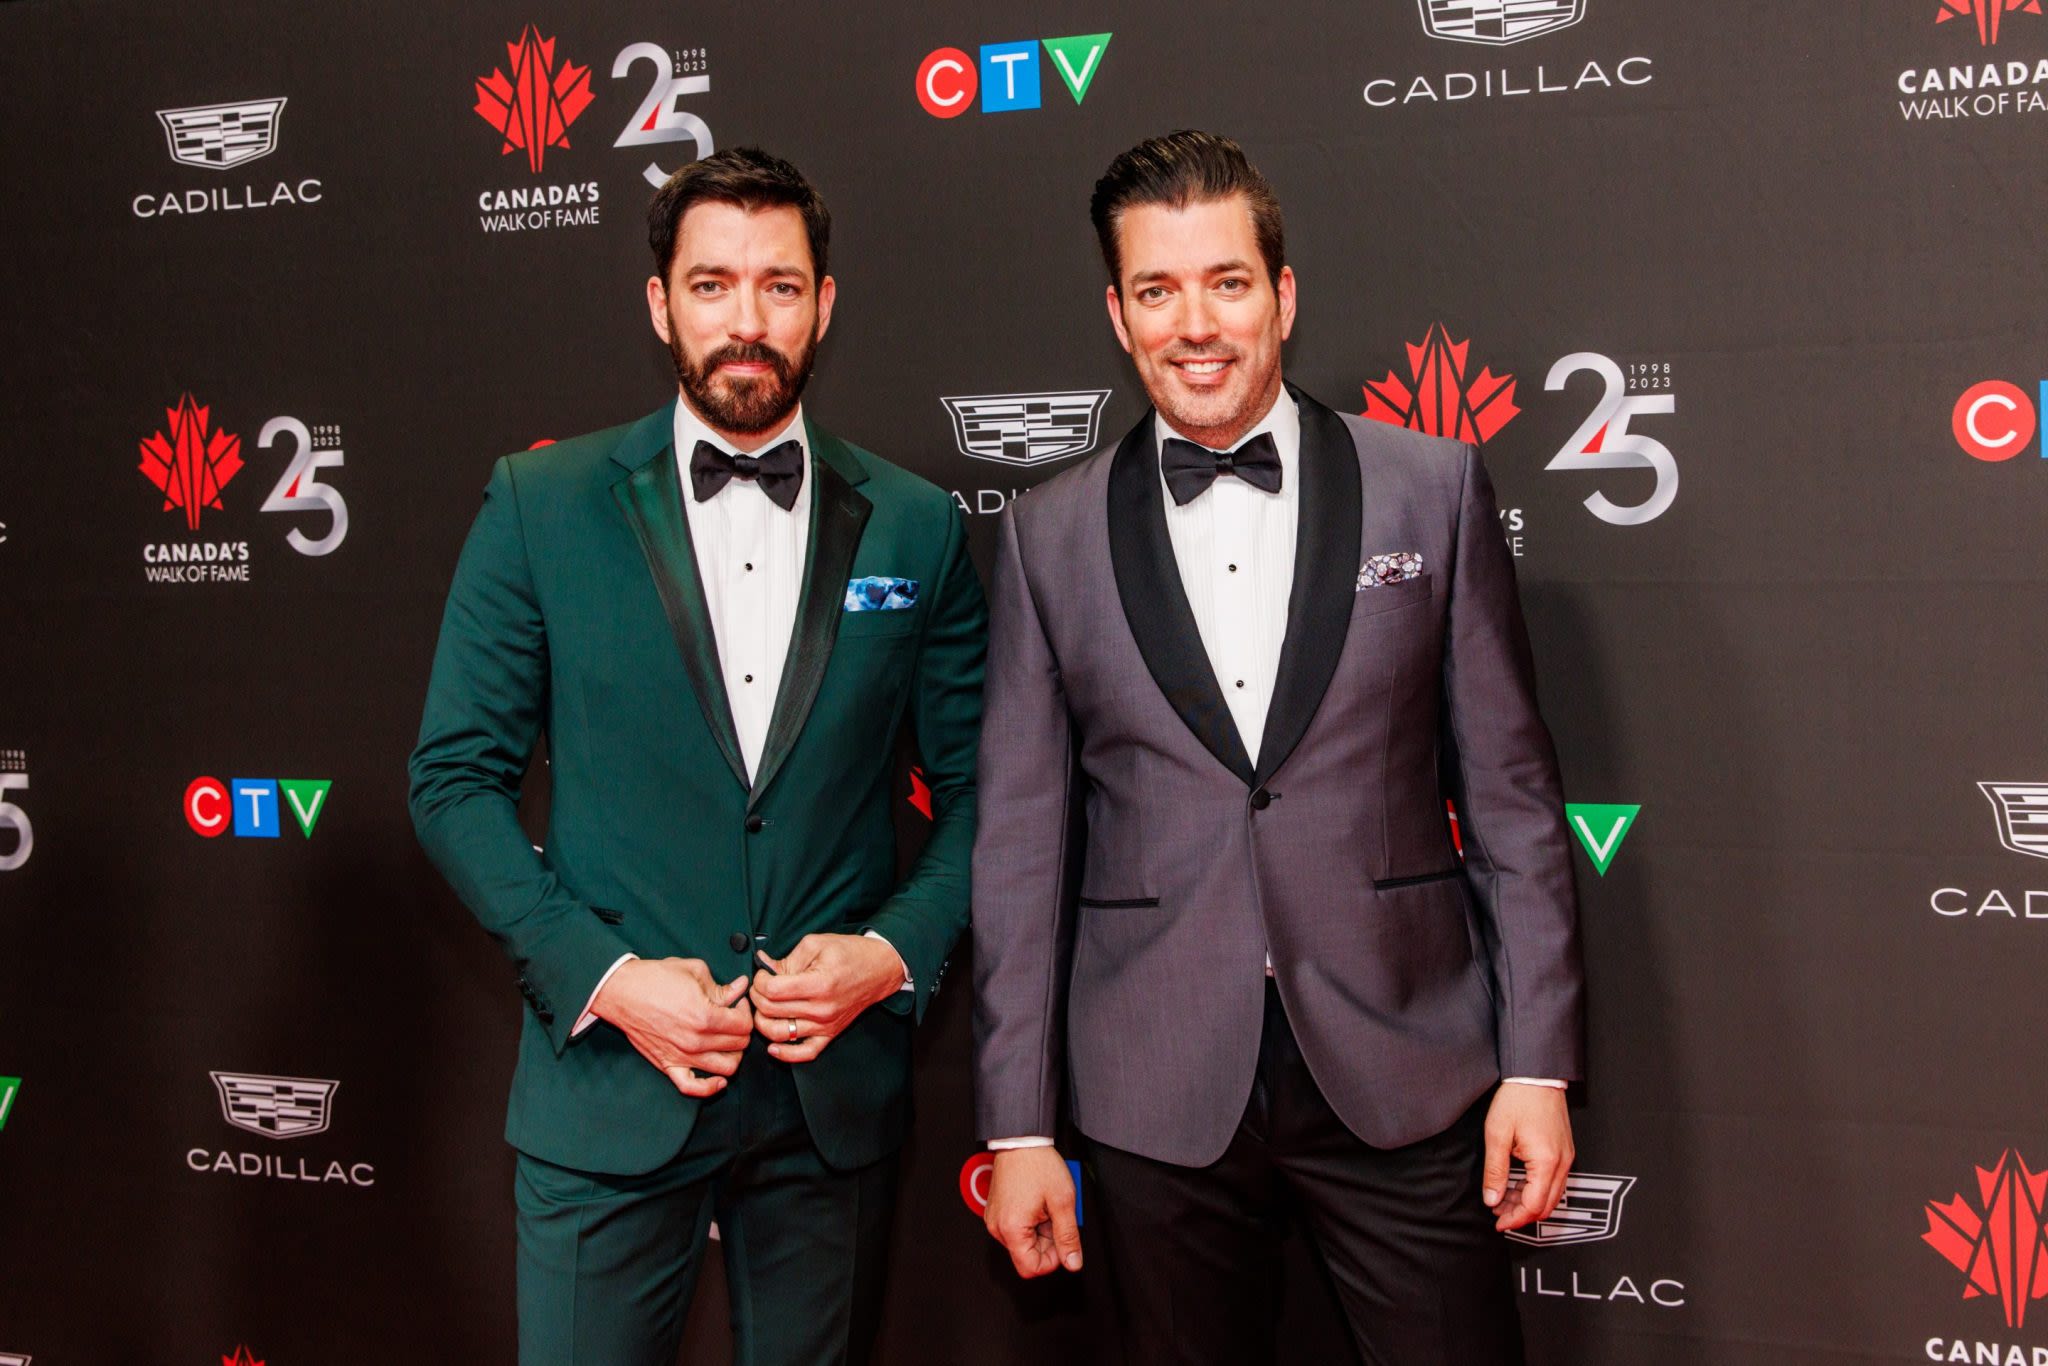 HGTV’s Property Brothers reveal the biggest mistakes new real estate investors make and predict the next hot housing market